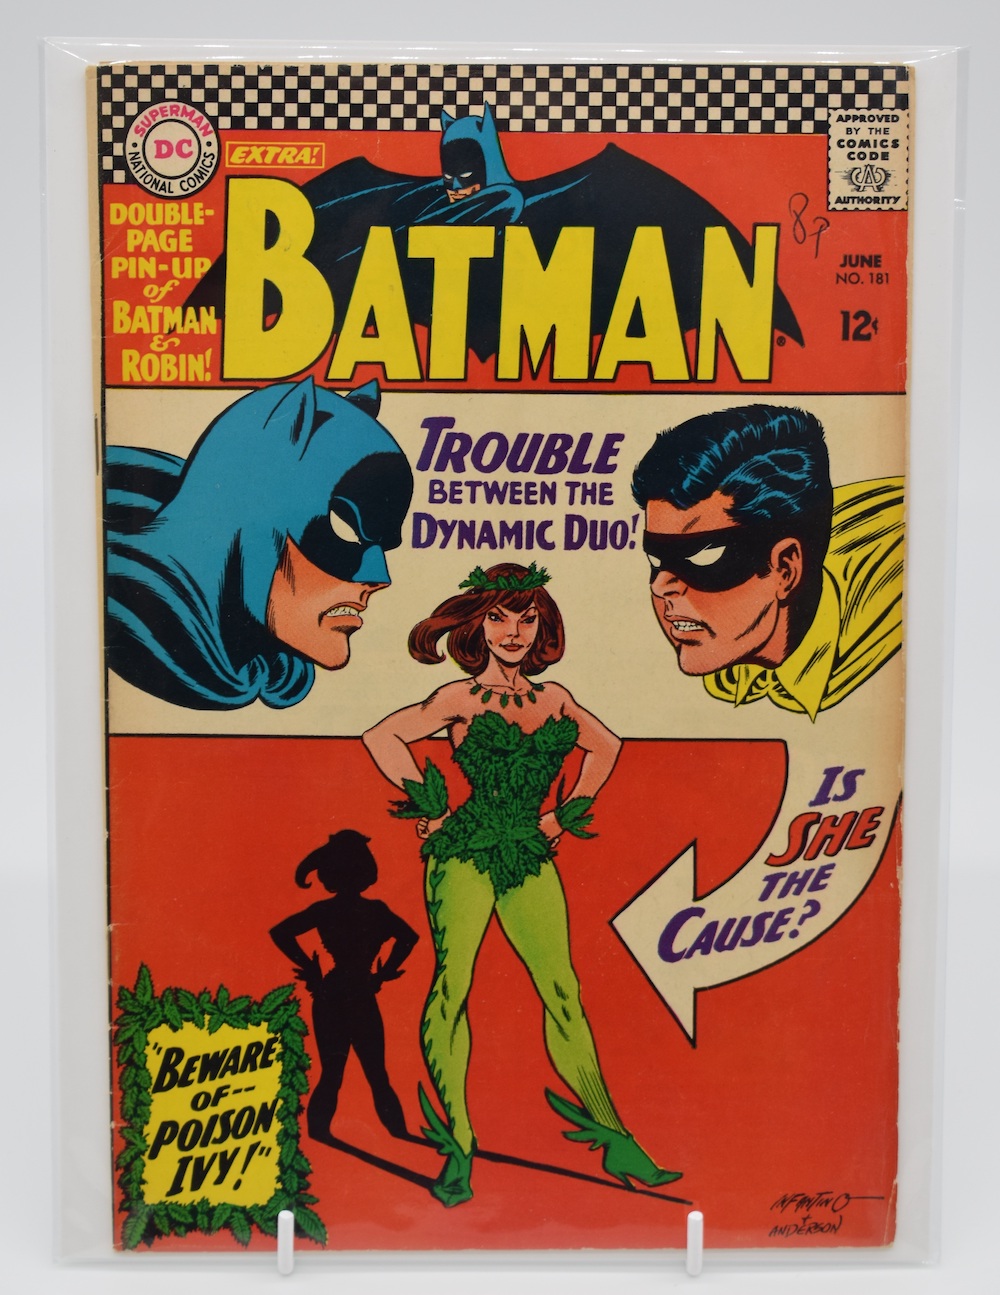 Batman Issue #181 By DC Comics 1St Appearance Of Poison Ivy With Pin Up, June 1966 HAMMER Ś550